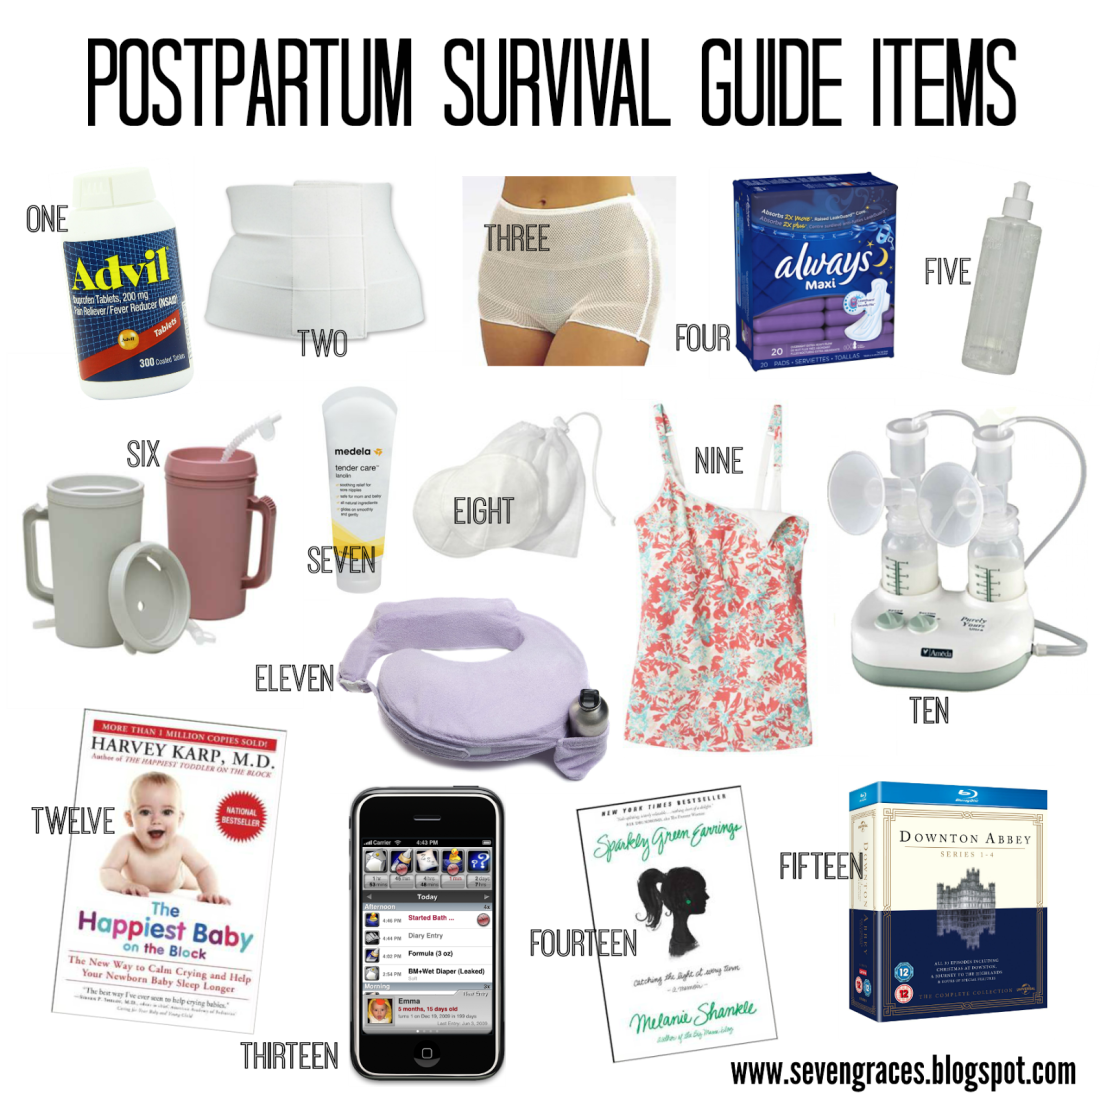 9 Postpartum Essentials for a Quick C-Section Recovery - Very